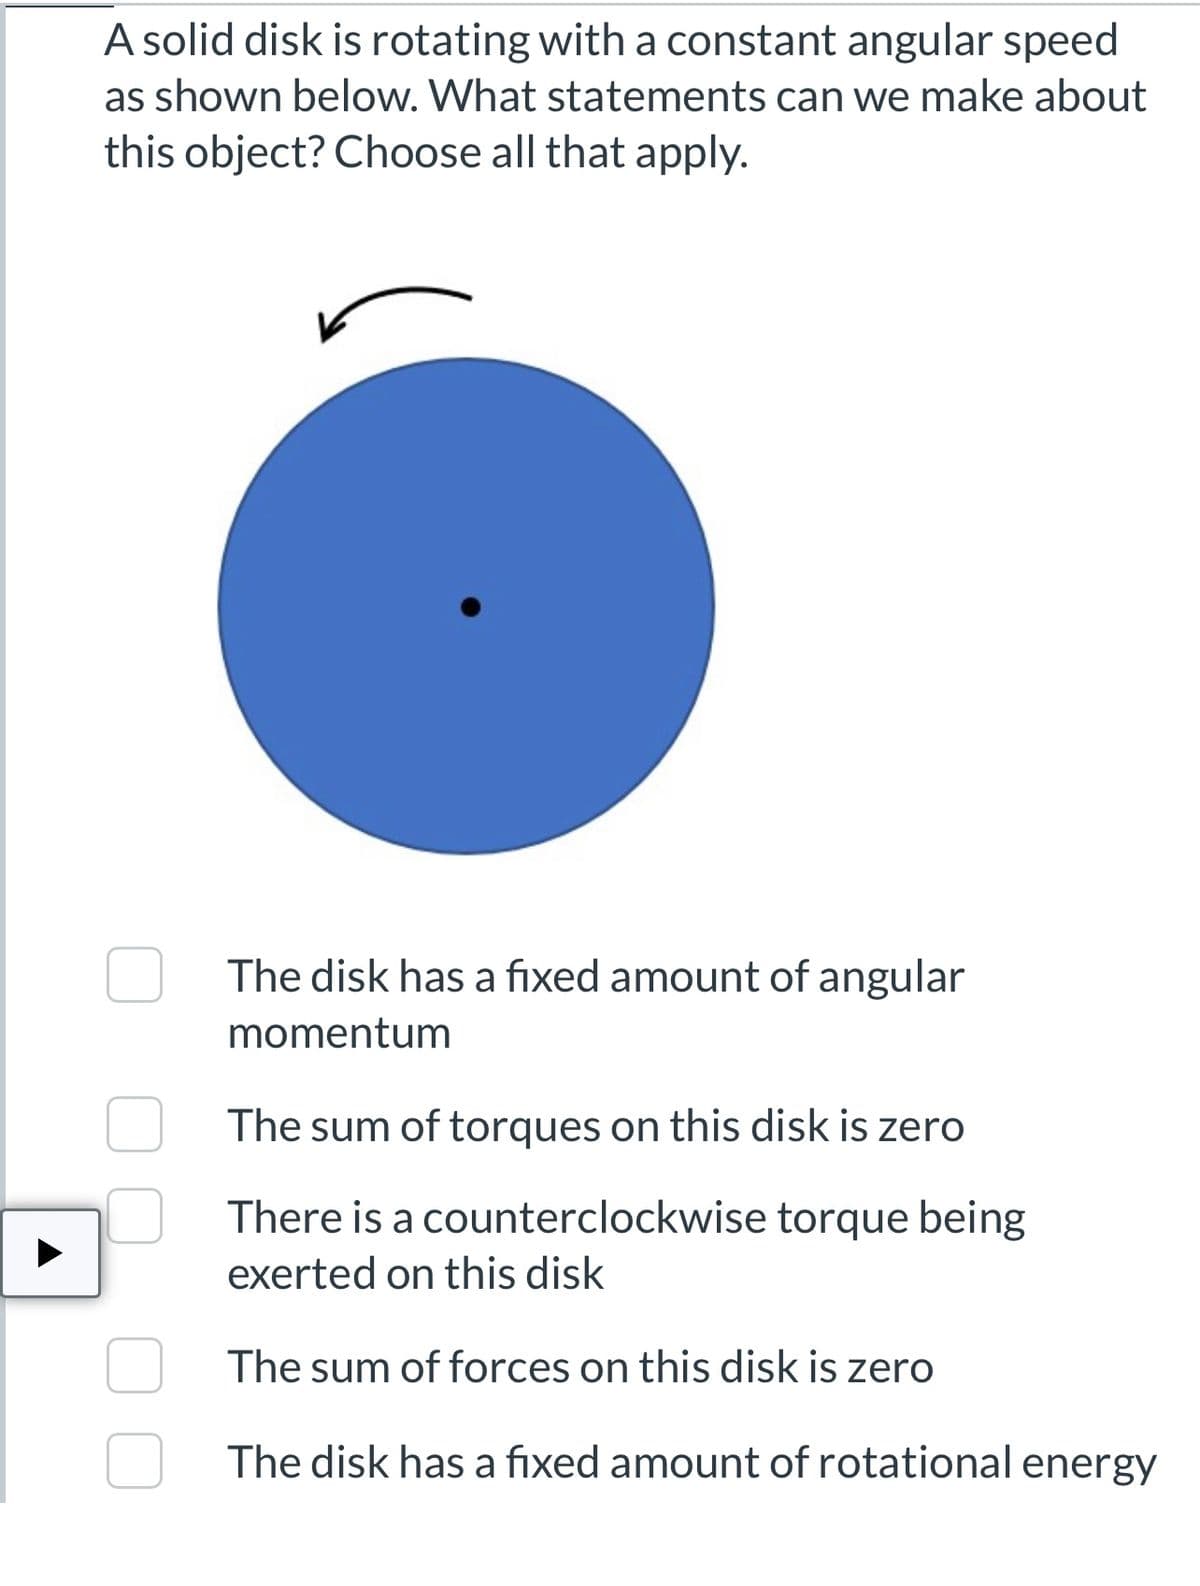 A solid disk is rotating with a constant angular speed
as shown below. What statements can we make about
this object? Choose all that apply.
The disk has a fixed amount of angular
momentum
The sum of torques on this disk is zero
There is a counterclockwise torque being
exerted on this disk
The sum of forces on this disk is zero
The disk has a fixed amount of rotational energy